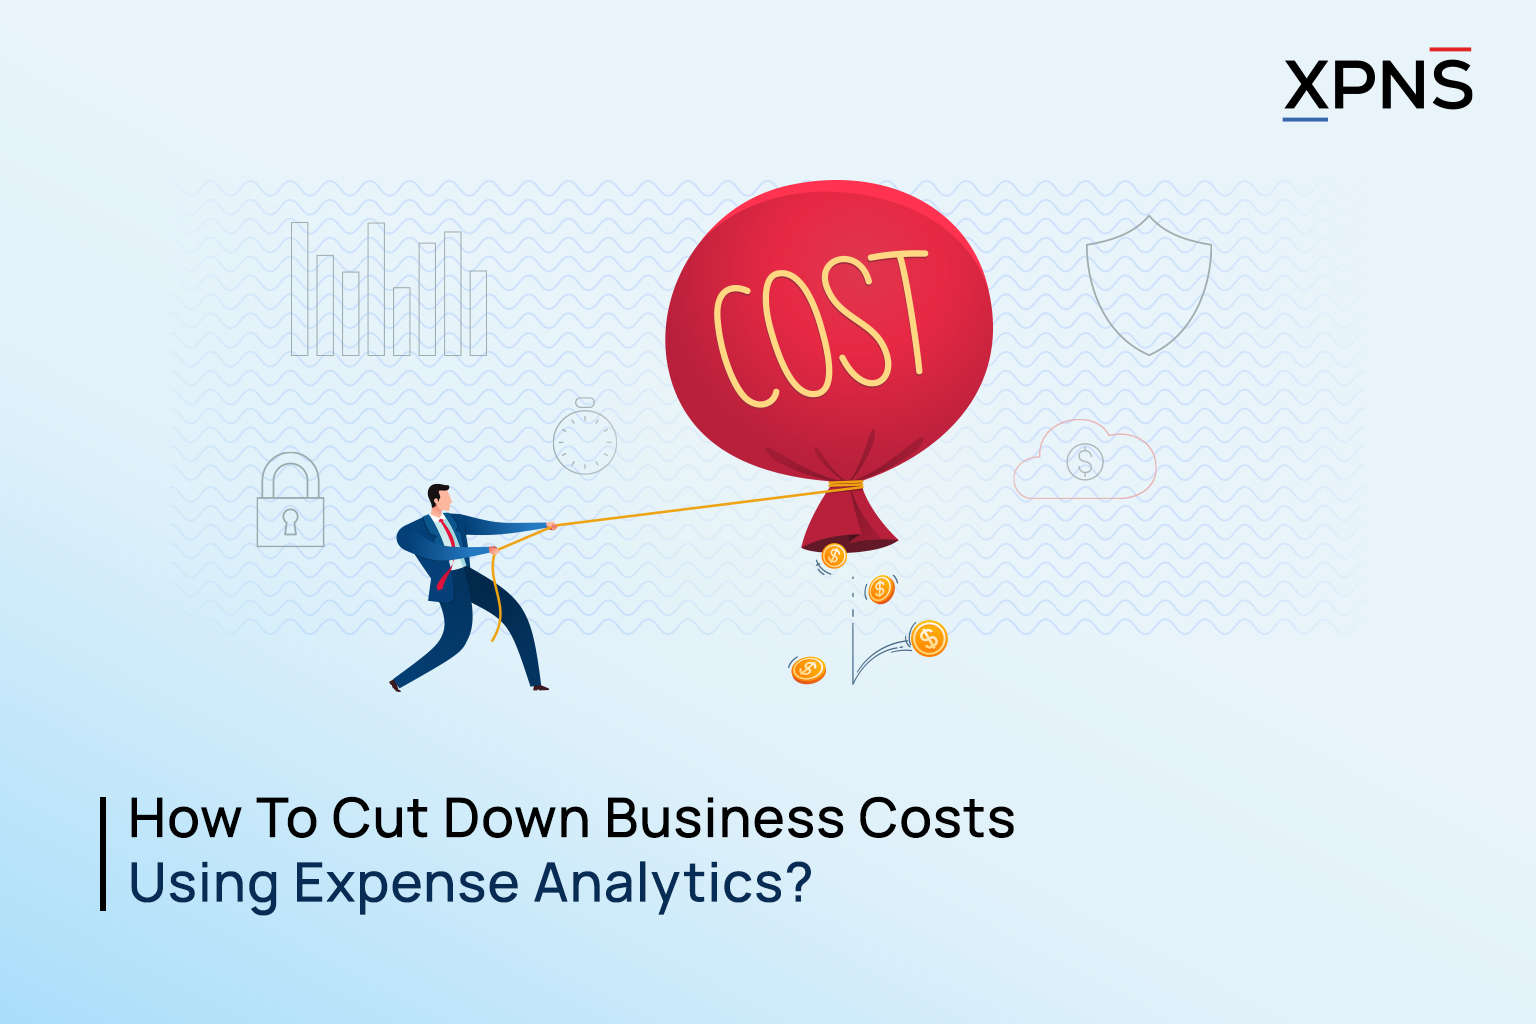 How To Cut Down Business Costs Using Expense Analytics? – XPNS